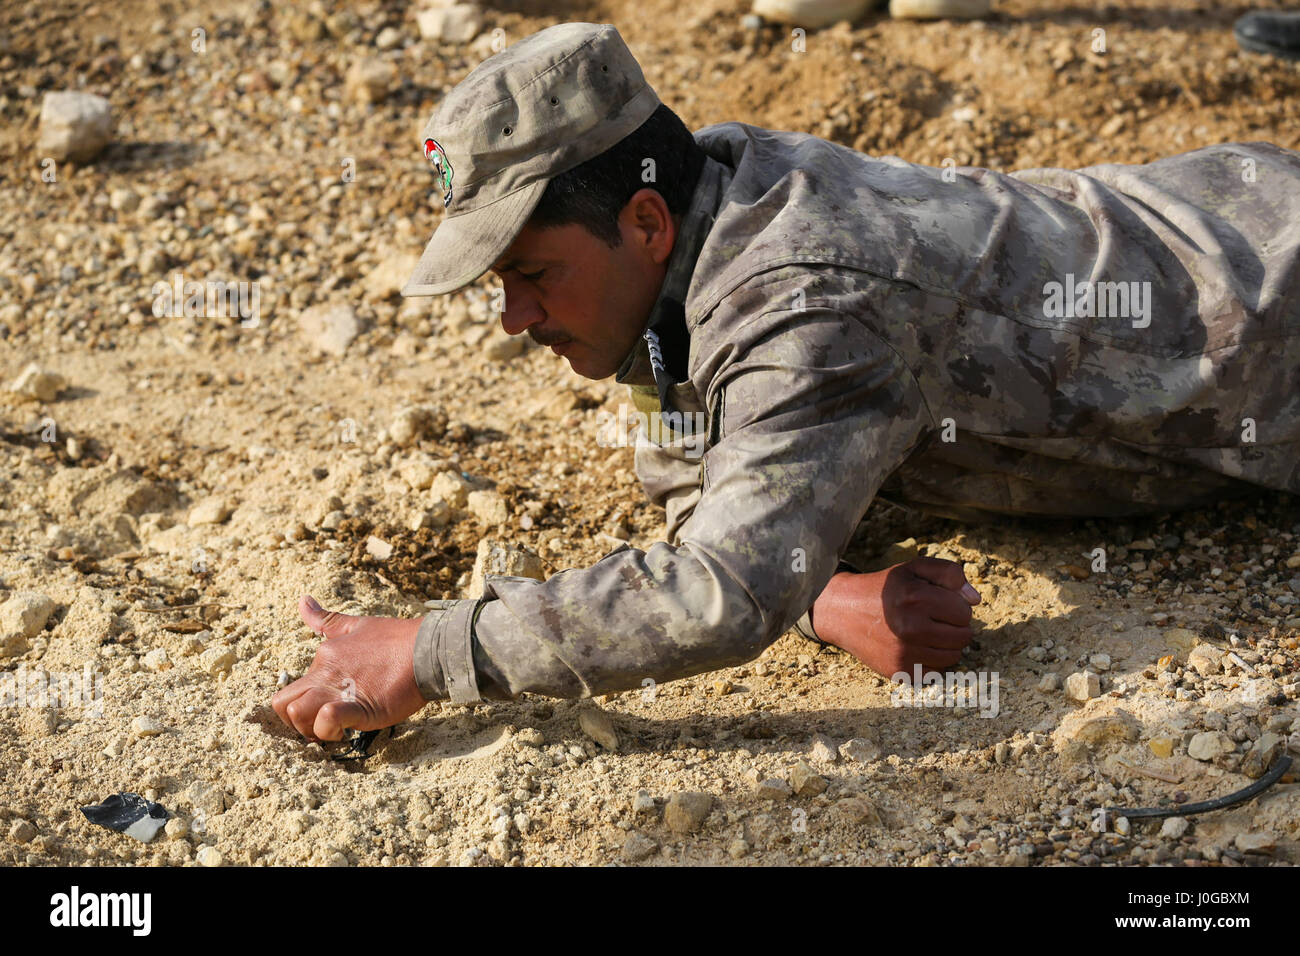 An Iraqi security forces soldier removes debris to search for a hidden simulated improvised explosive device during counter-IED training at Al Asad Air Base, Iraq, March 29, 2017.  This training is part of the overall Combined Joint Task Force – Operation Inherent Resolve building partner capacity mission by training and improving the capability of partnered forces fighting ISIS. CJTF- OIR is the global Coalition to defeat ISIS in Iraq and Syria. (U.S. Army photo by Sgt. Lisa Soy) Stock Photo